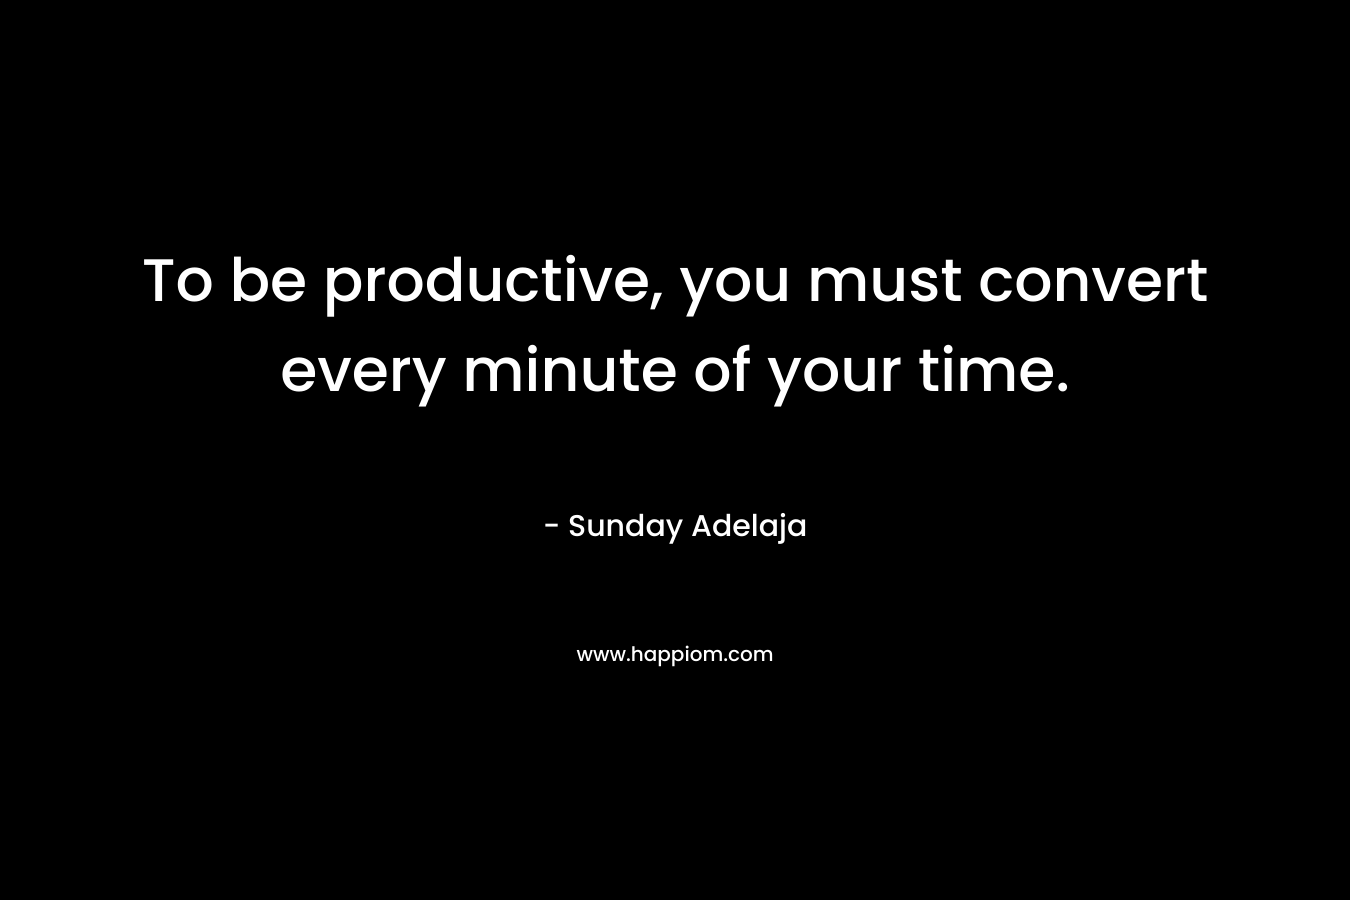 To be productive, you must convert every minute of your time.